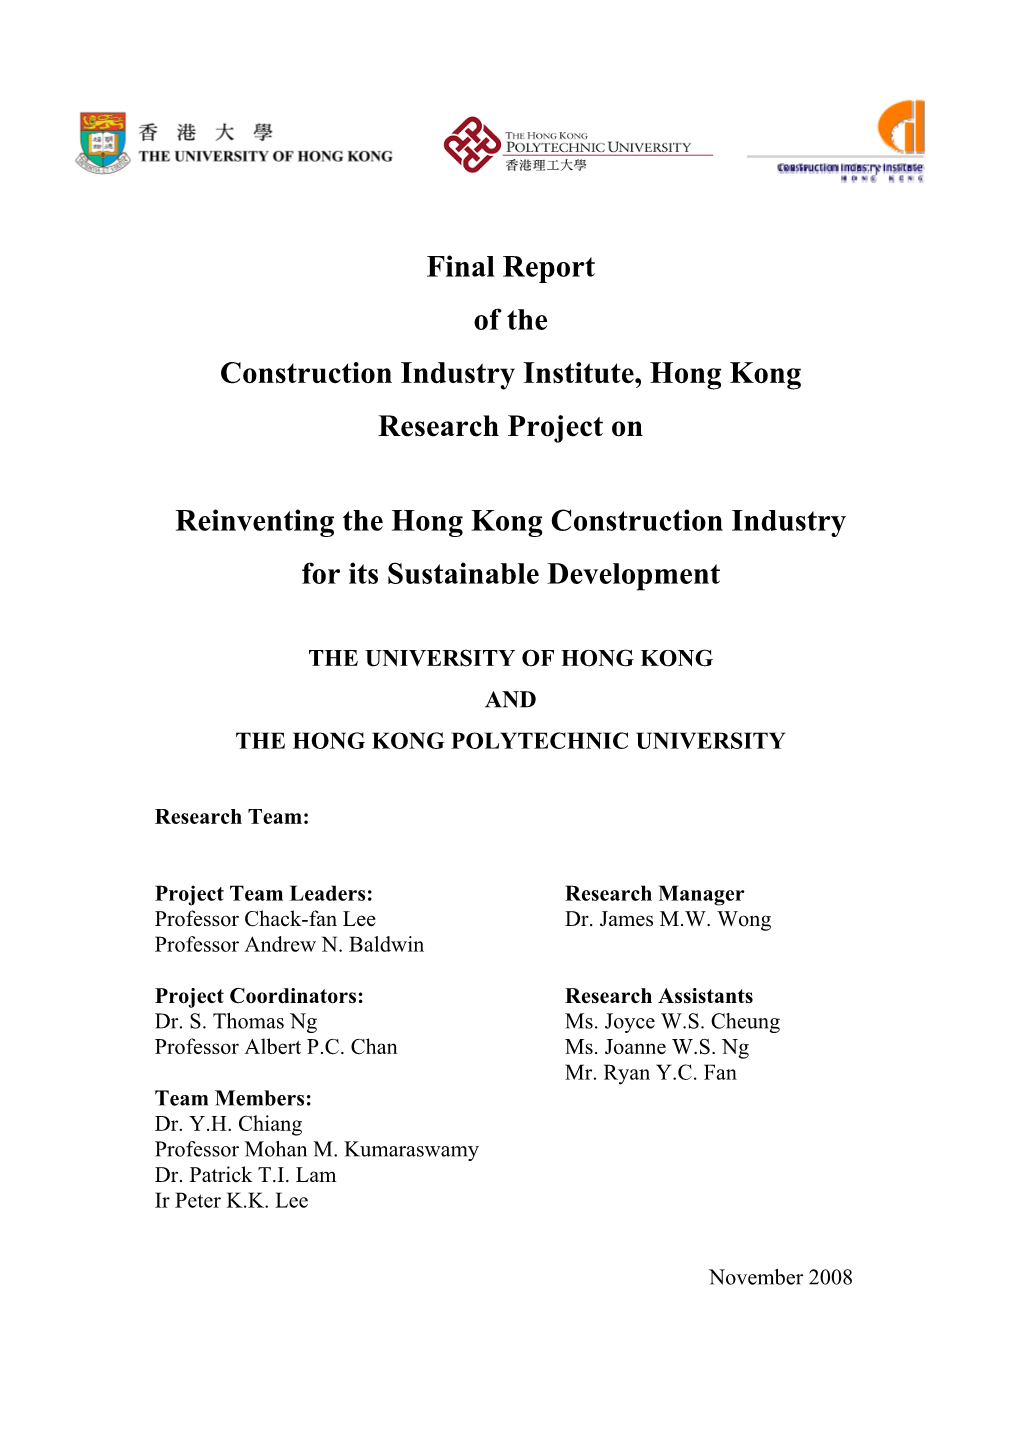 Final Report of the Construction Industry Institute, Hong Kong Research Project On